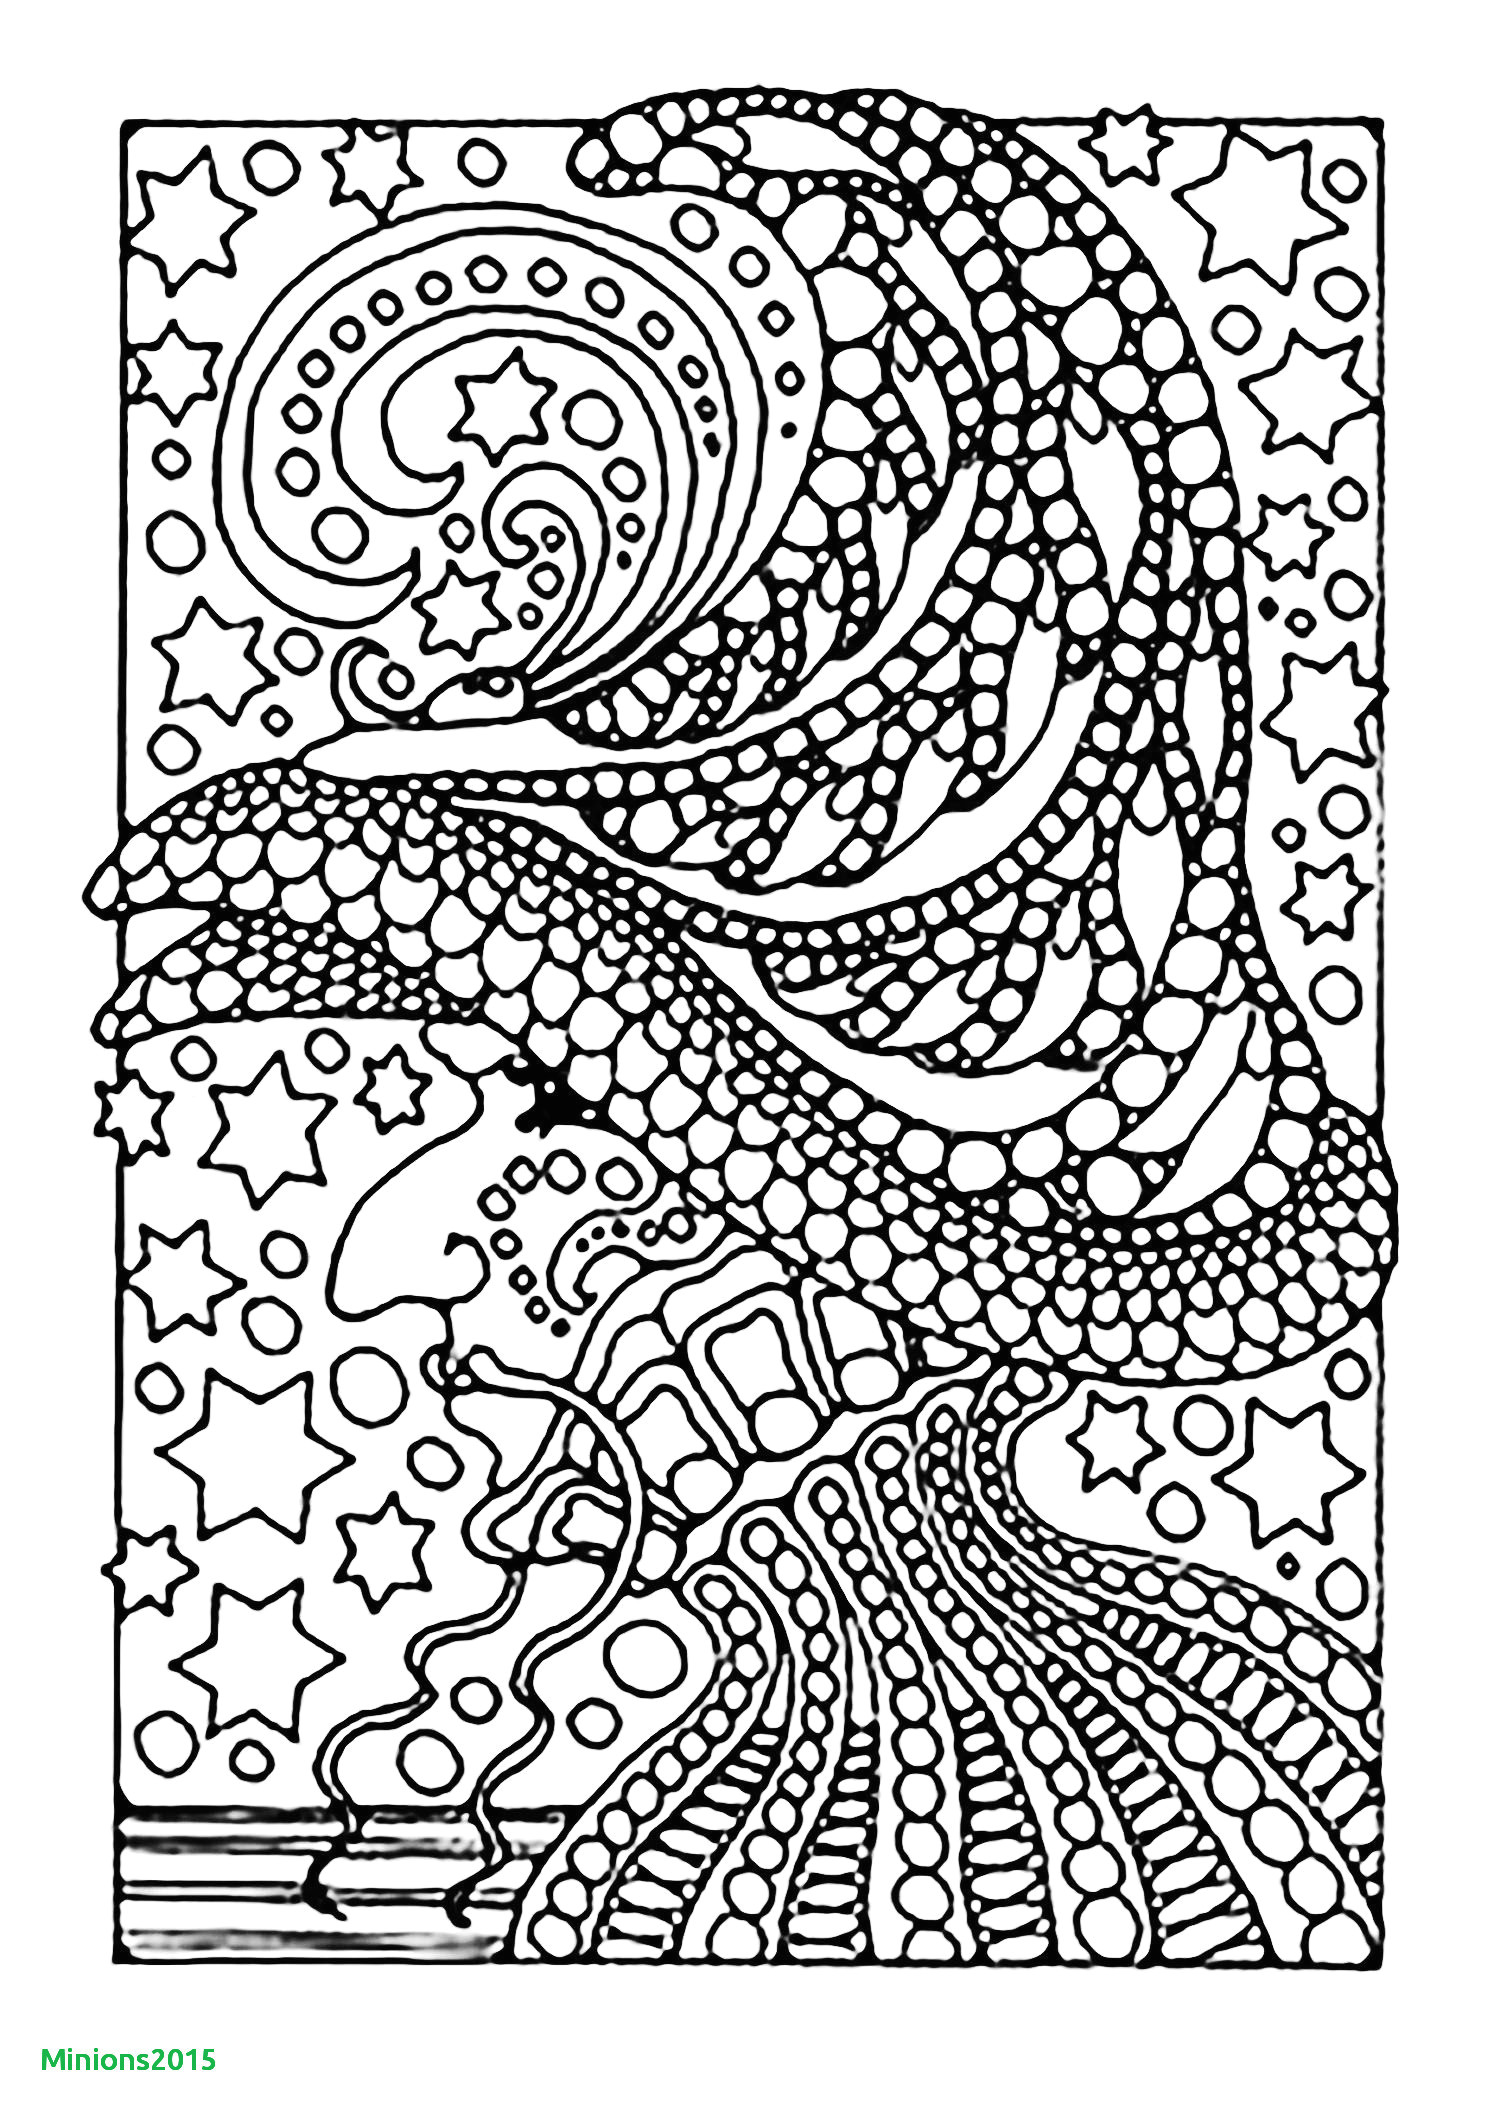 minions stuart drawing free cool coloring page unique witch coloring pages new crayola pages 0d